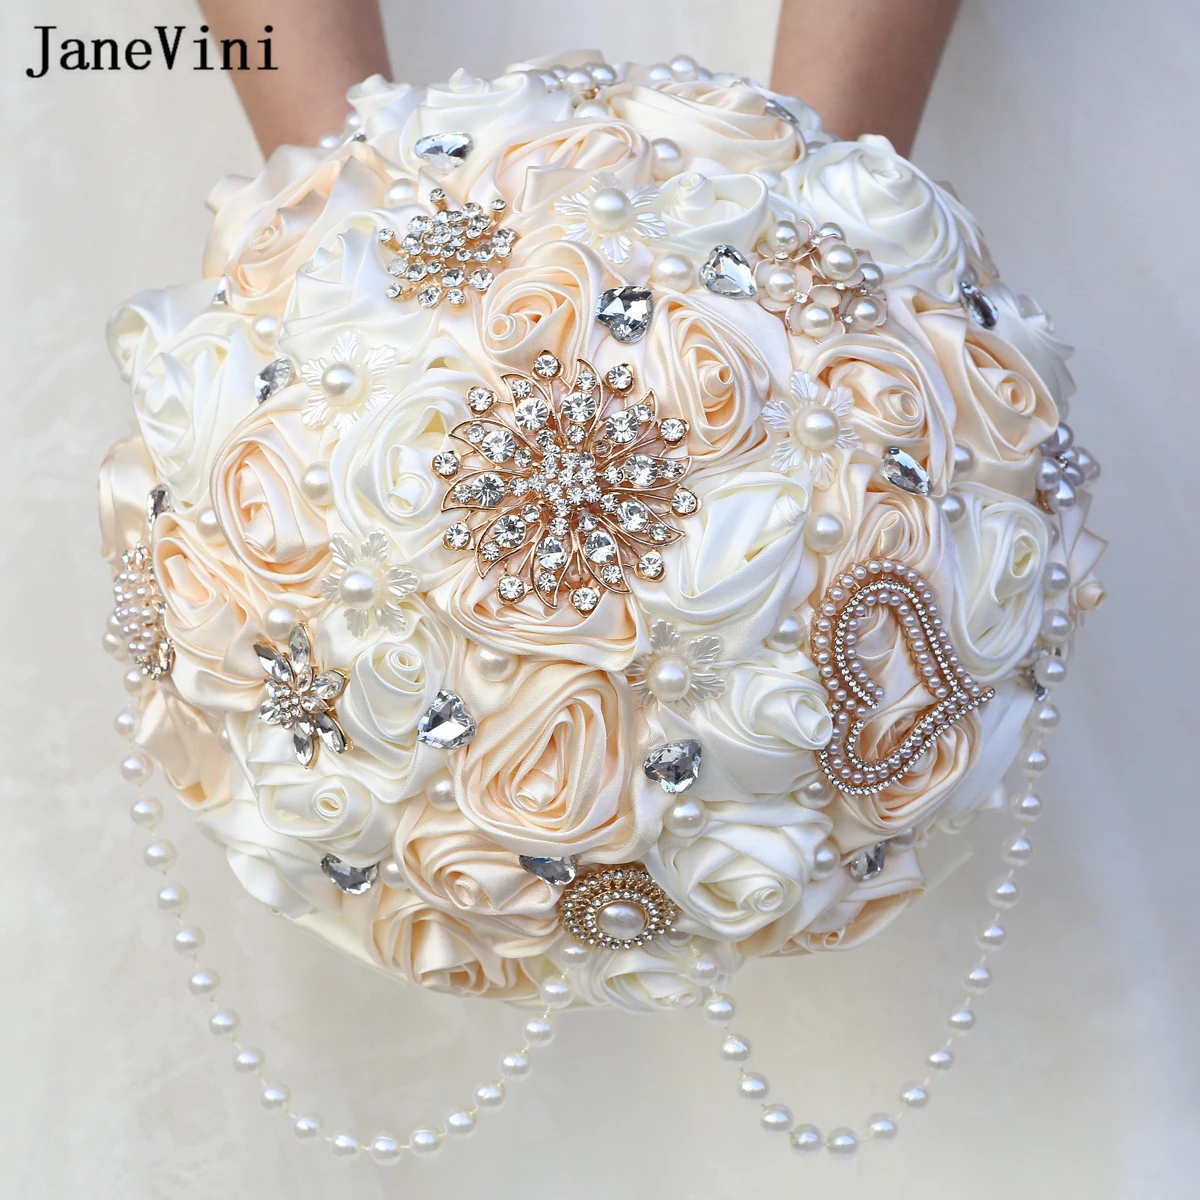 janevini-luxury-ivory-bridal-bouquets-pearls-artificial-satin-roses-flowers-bride-wedding-bouquet-rhinestone-sparkle-customized